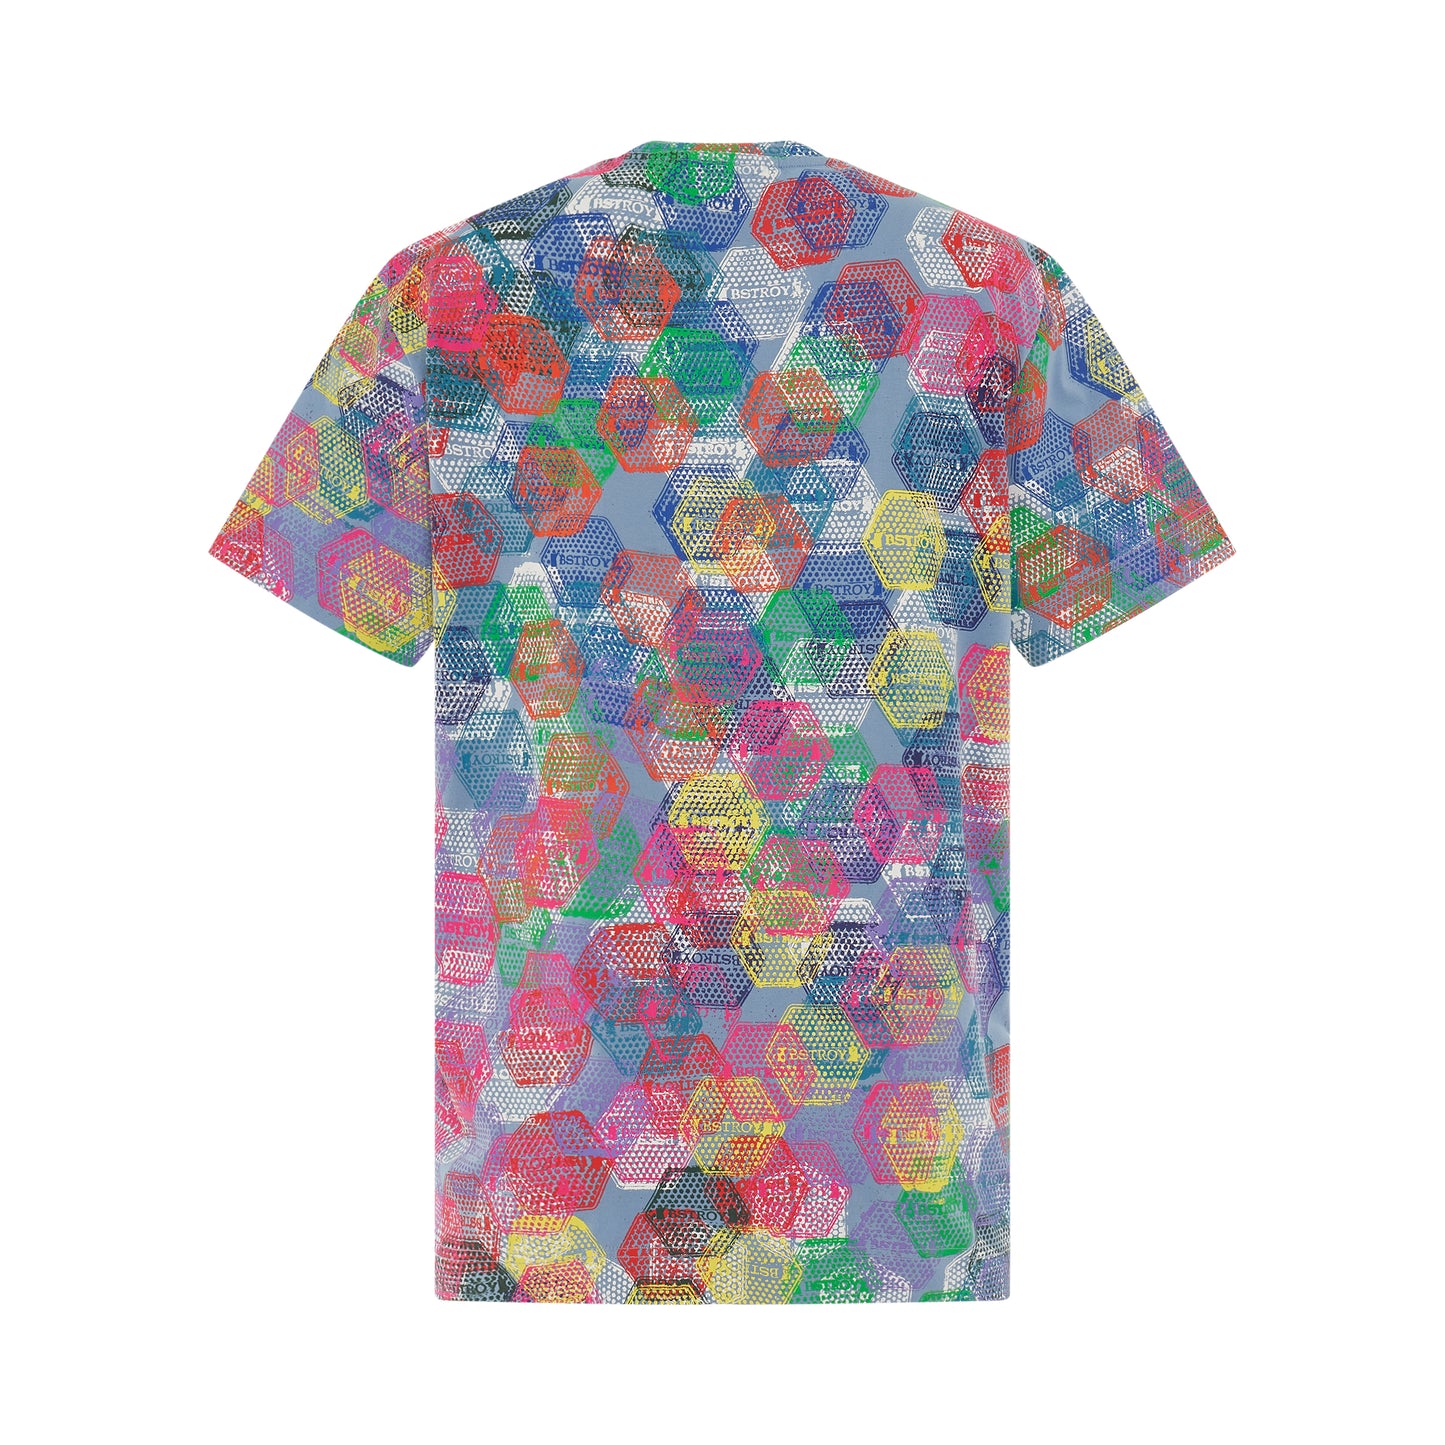 BSTROY All Over Patch Print Loose Fit T-Shirt in Multicolour